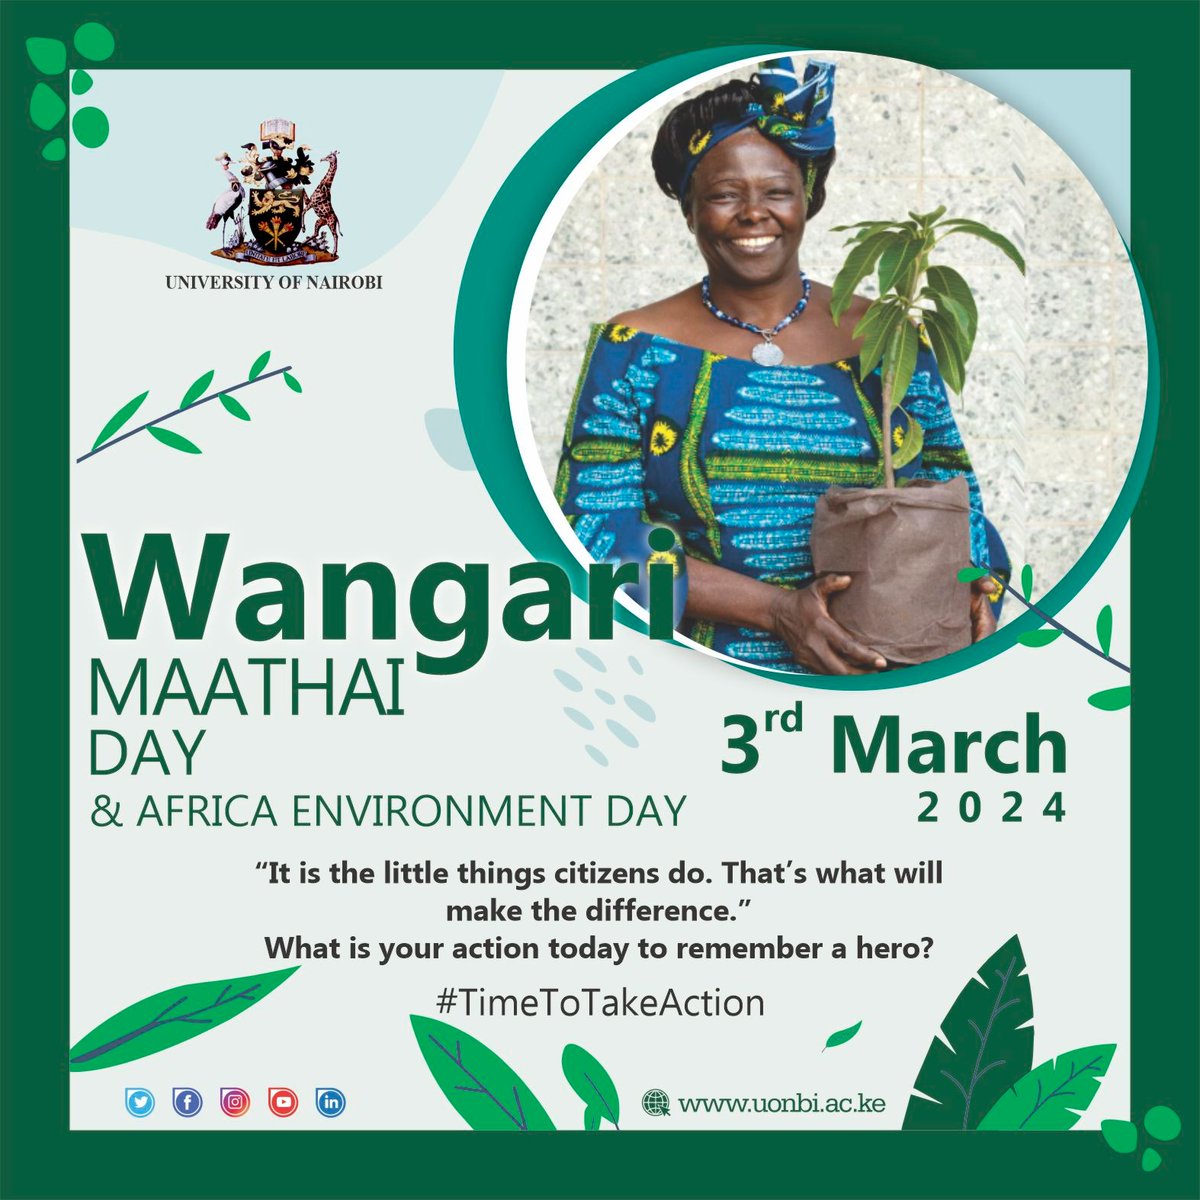 fellow Kenyans it's the little things that you do that will make the difference. As we celebrate this day take a moment and reflect whether you're conserving the environment. Make it habitual #TimeToTakeAction